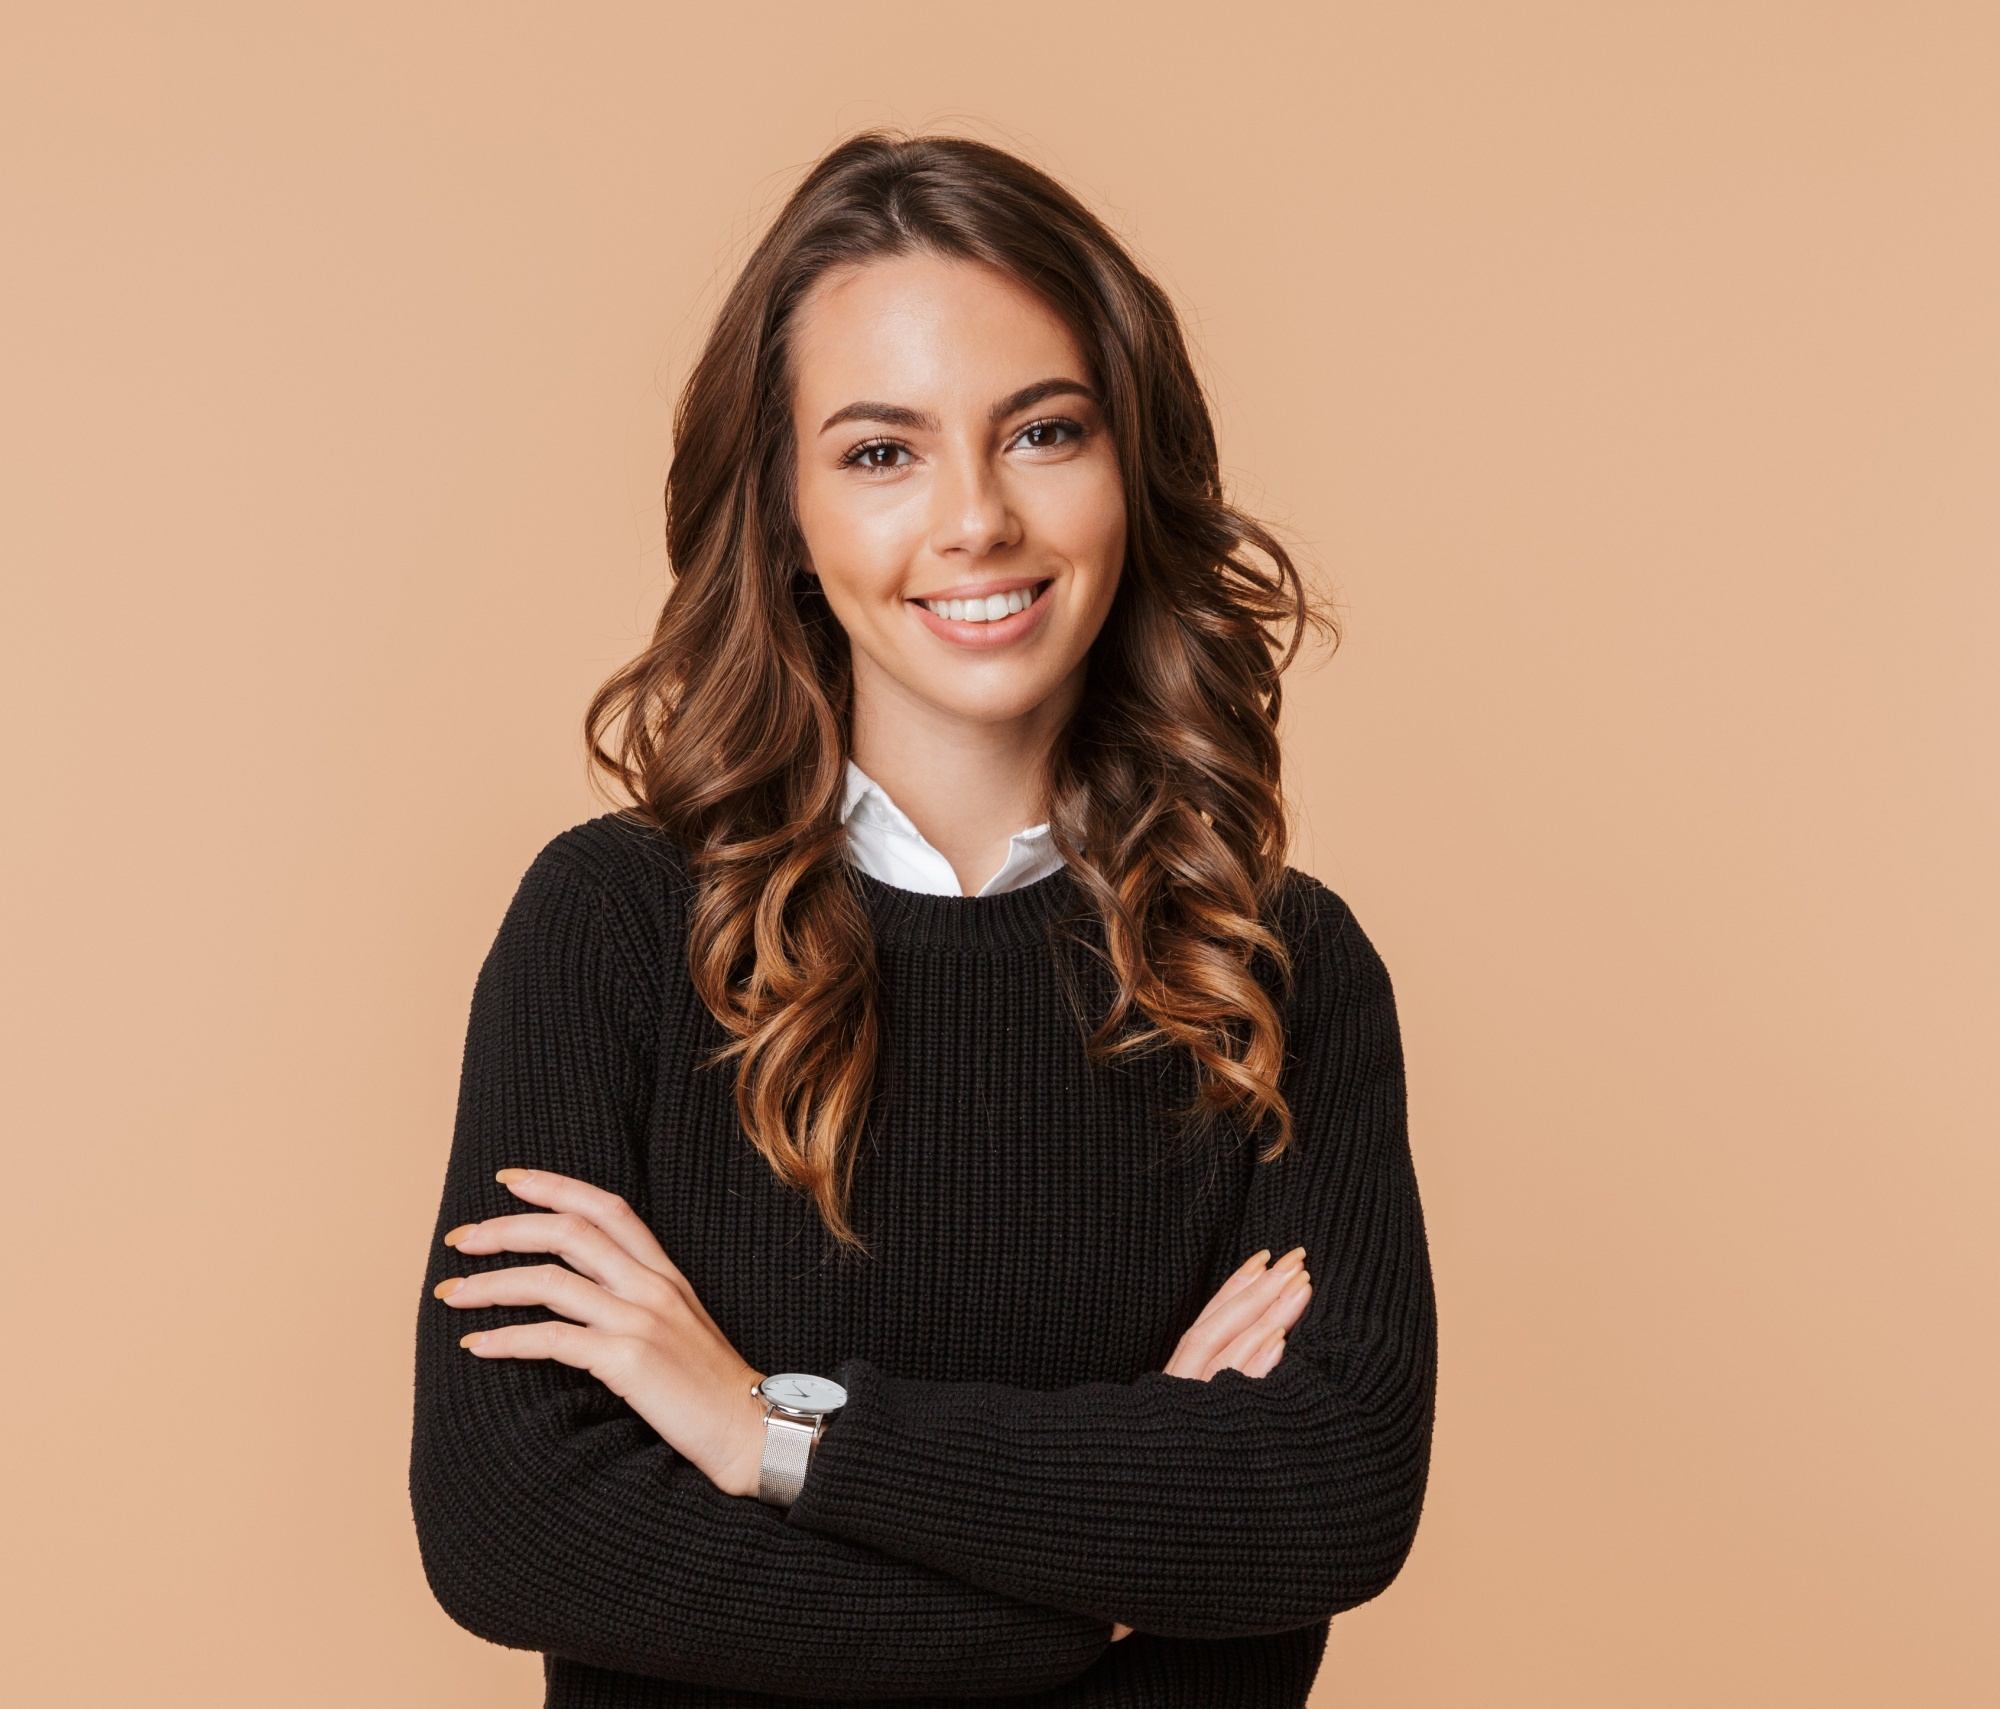 Golden brown hair color: Woman with long wavy brown hair wearing a black shirt against a peach backdrop